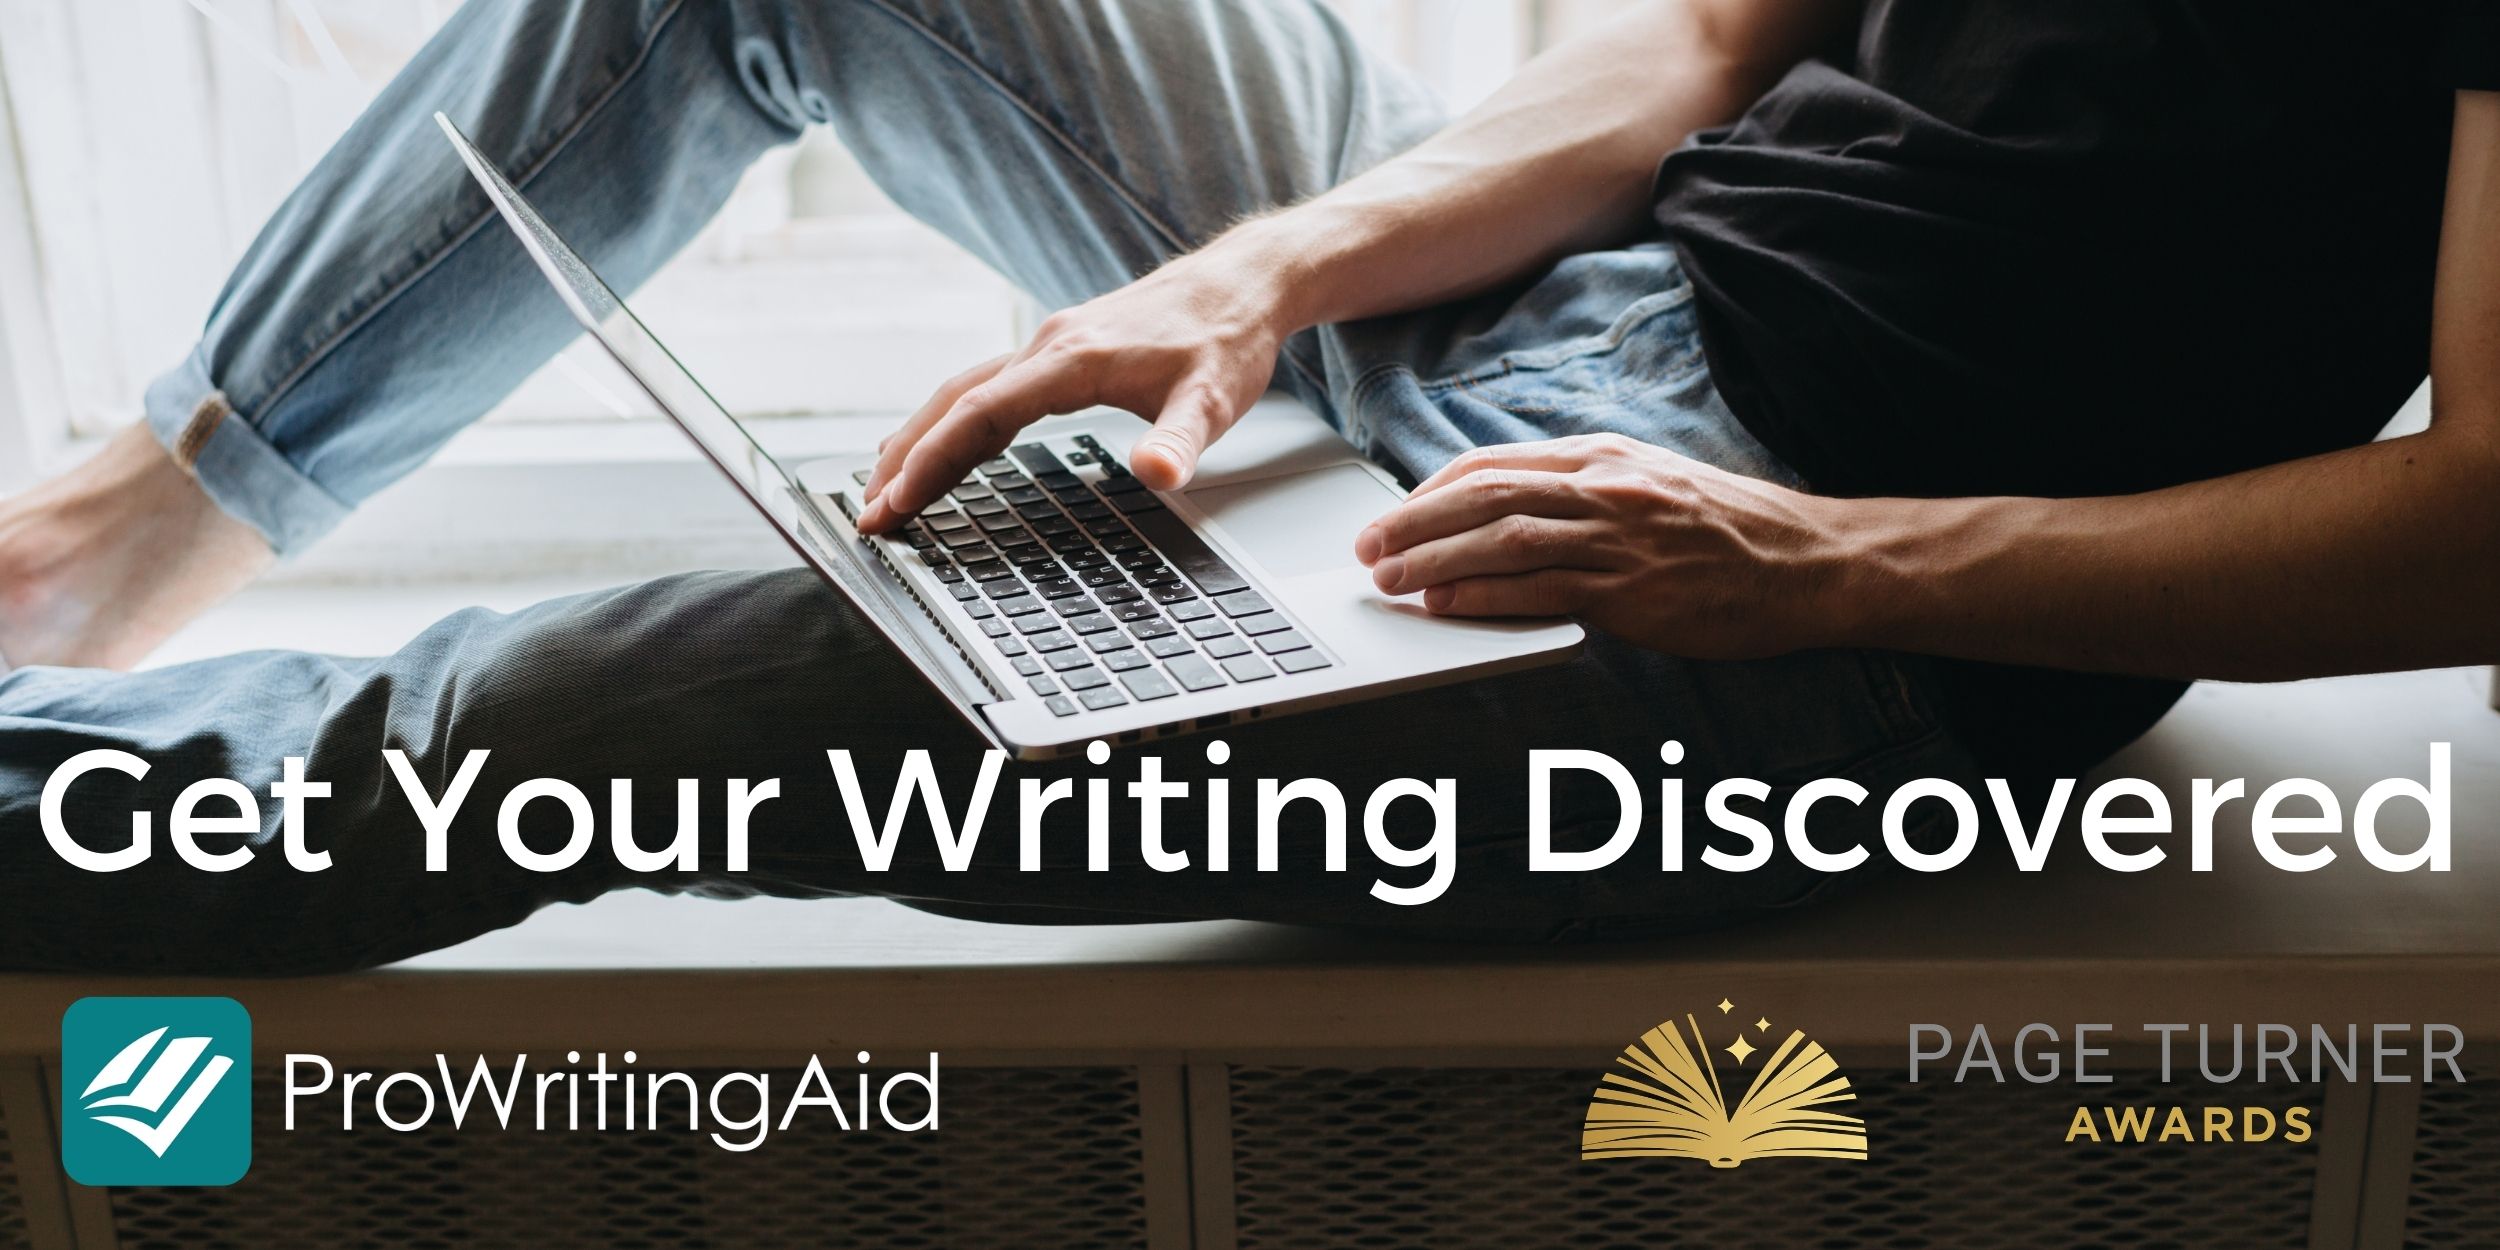 Get Your Writing Discovered